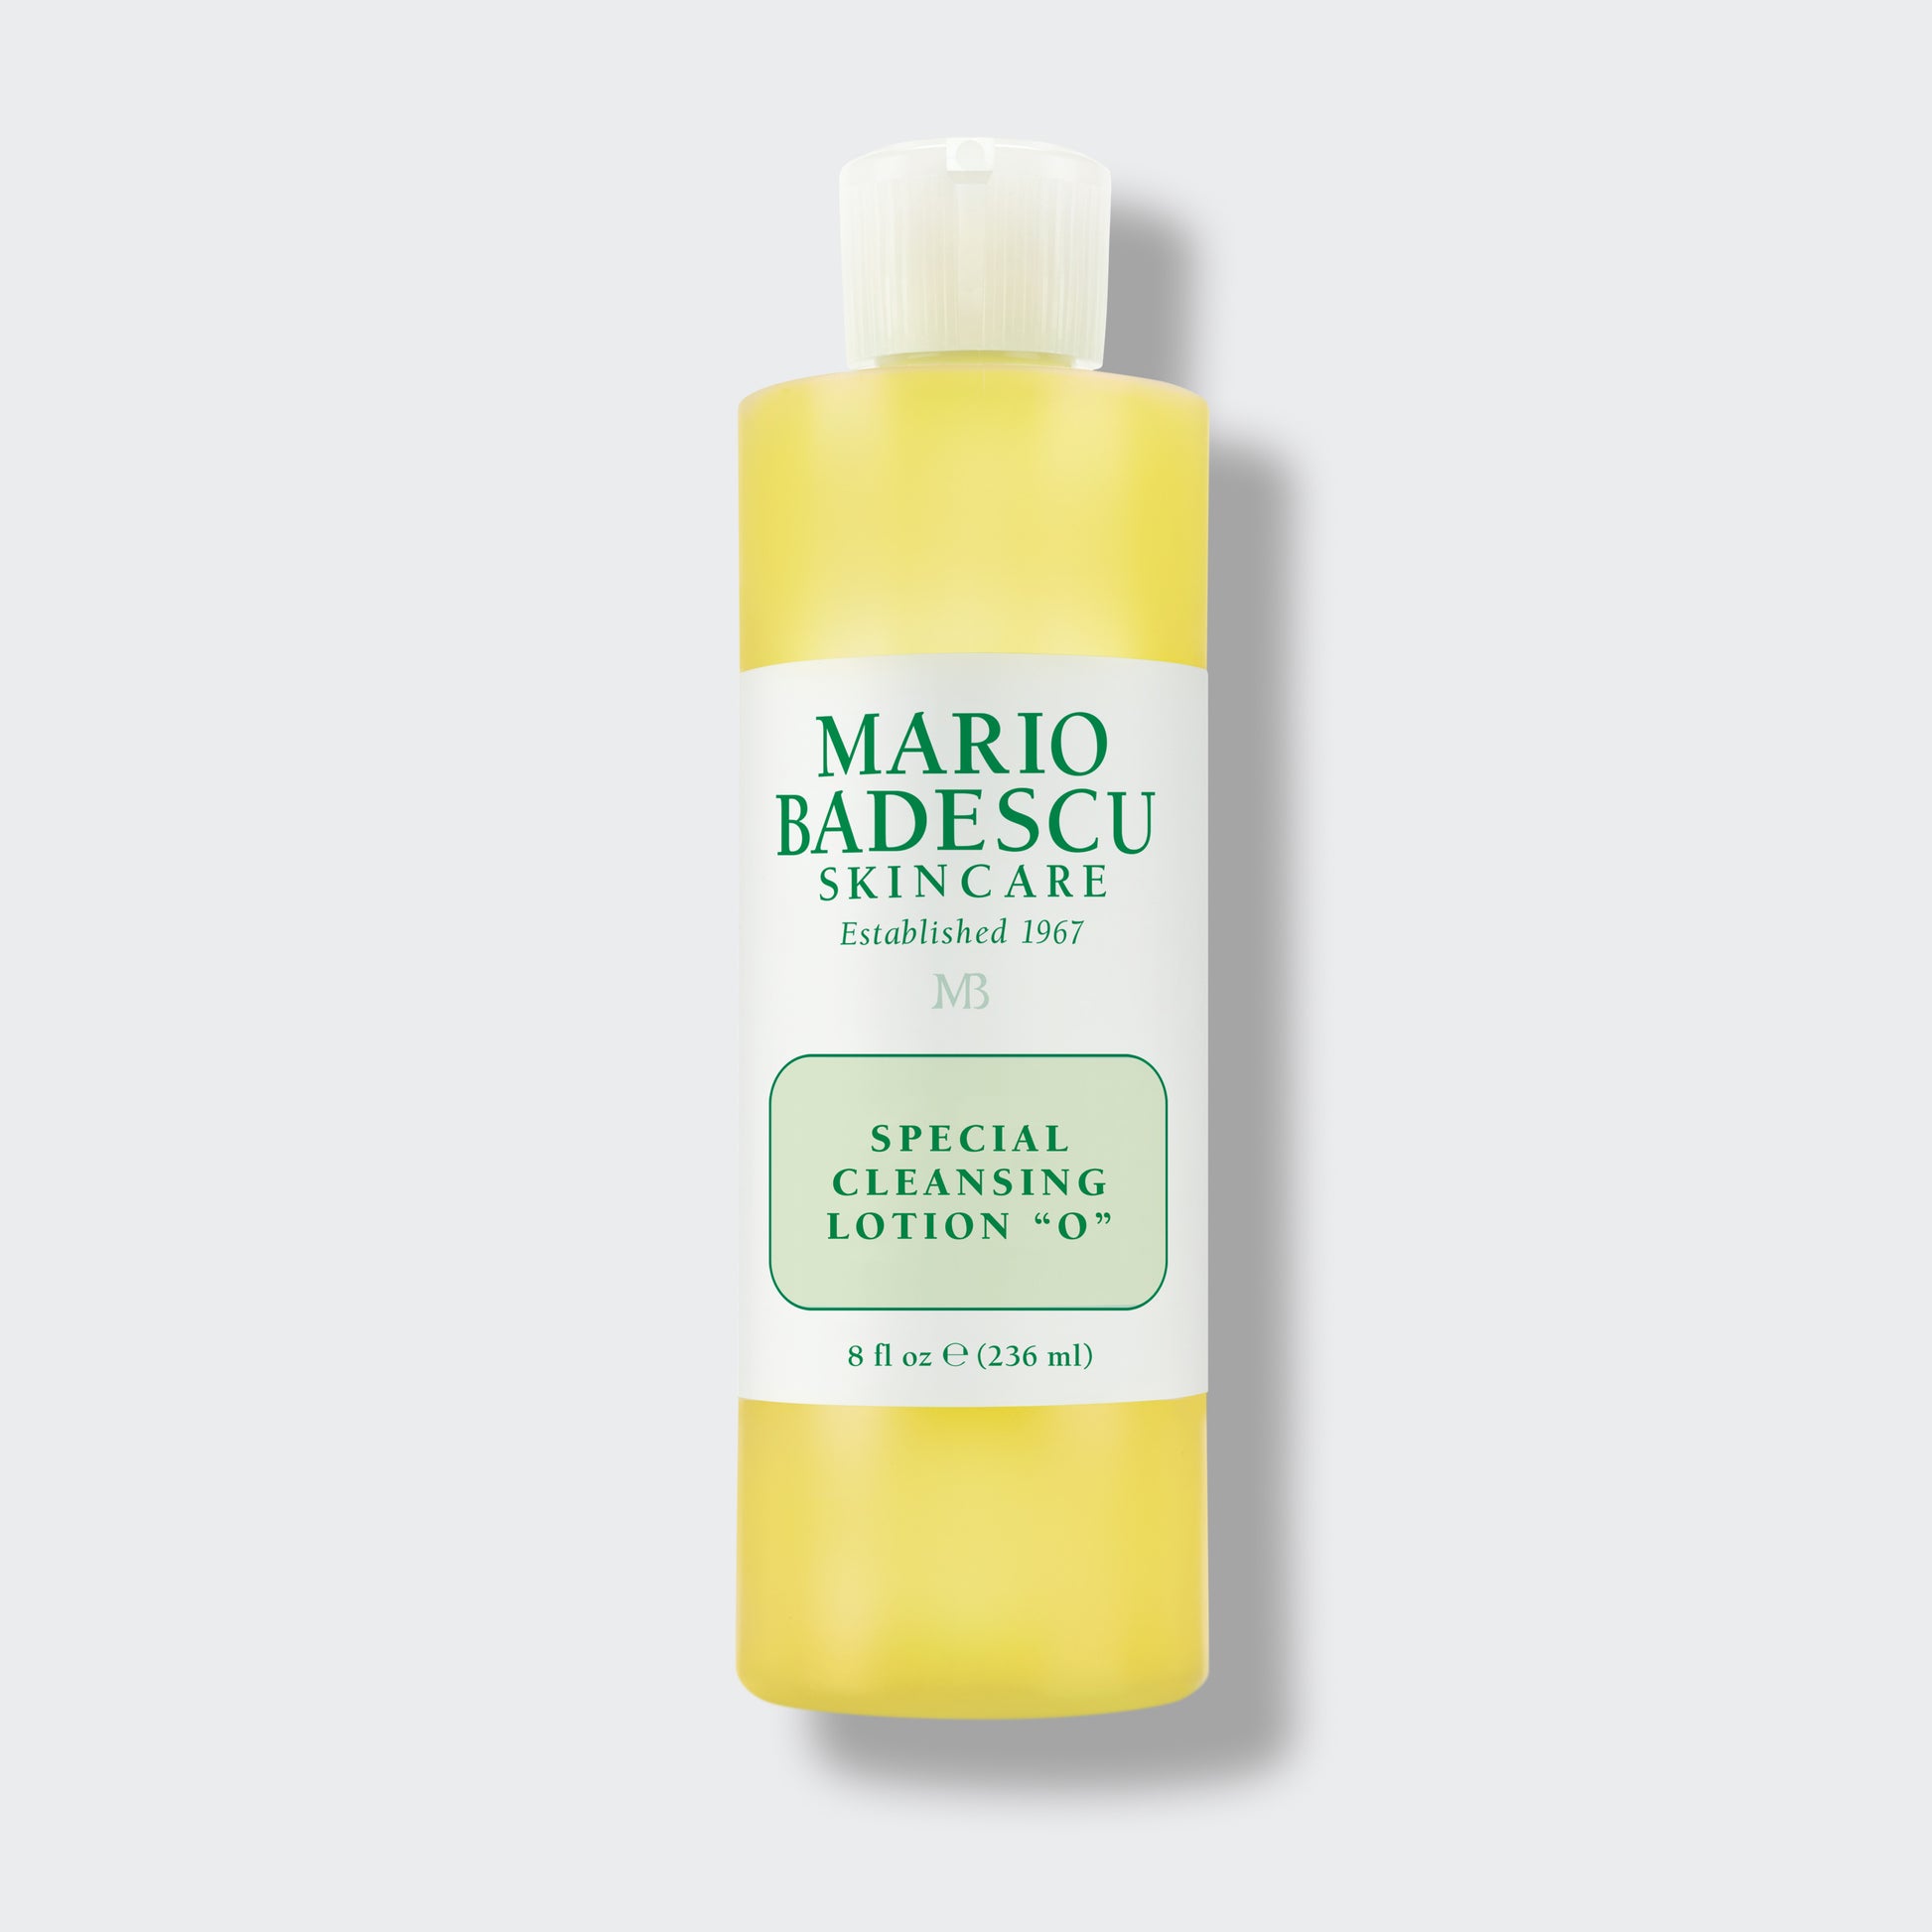 Mario Badescu Special Cleansing Lotion "O" 